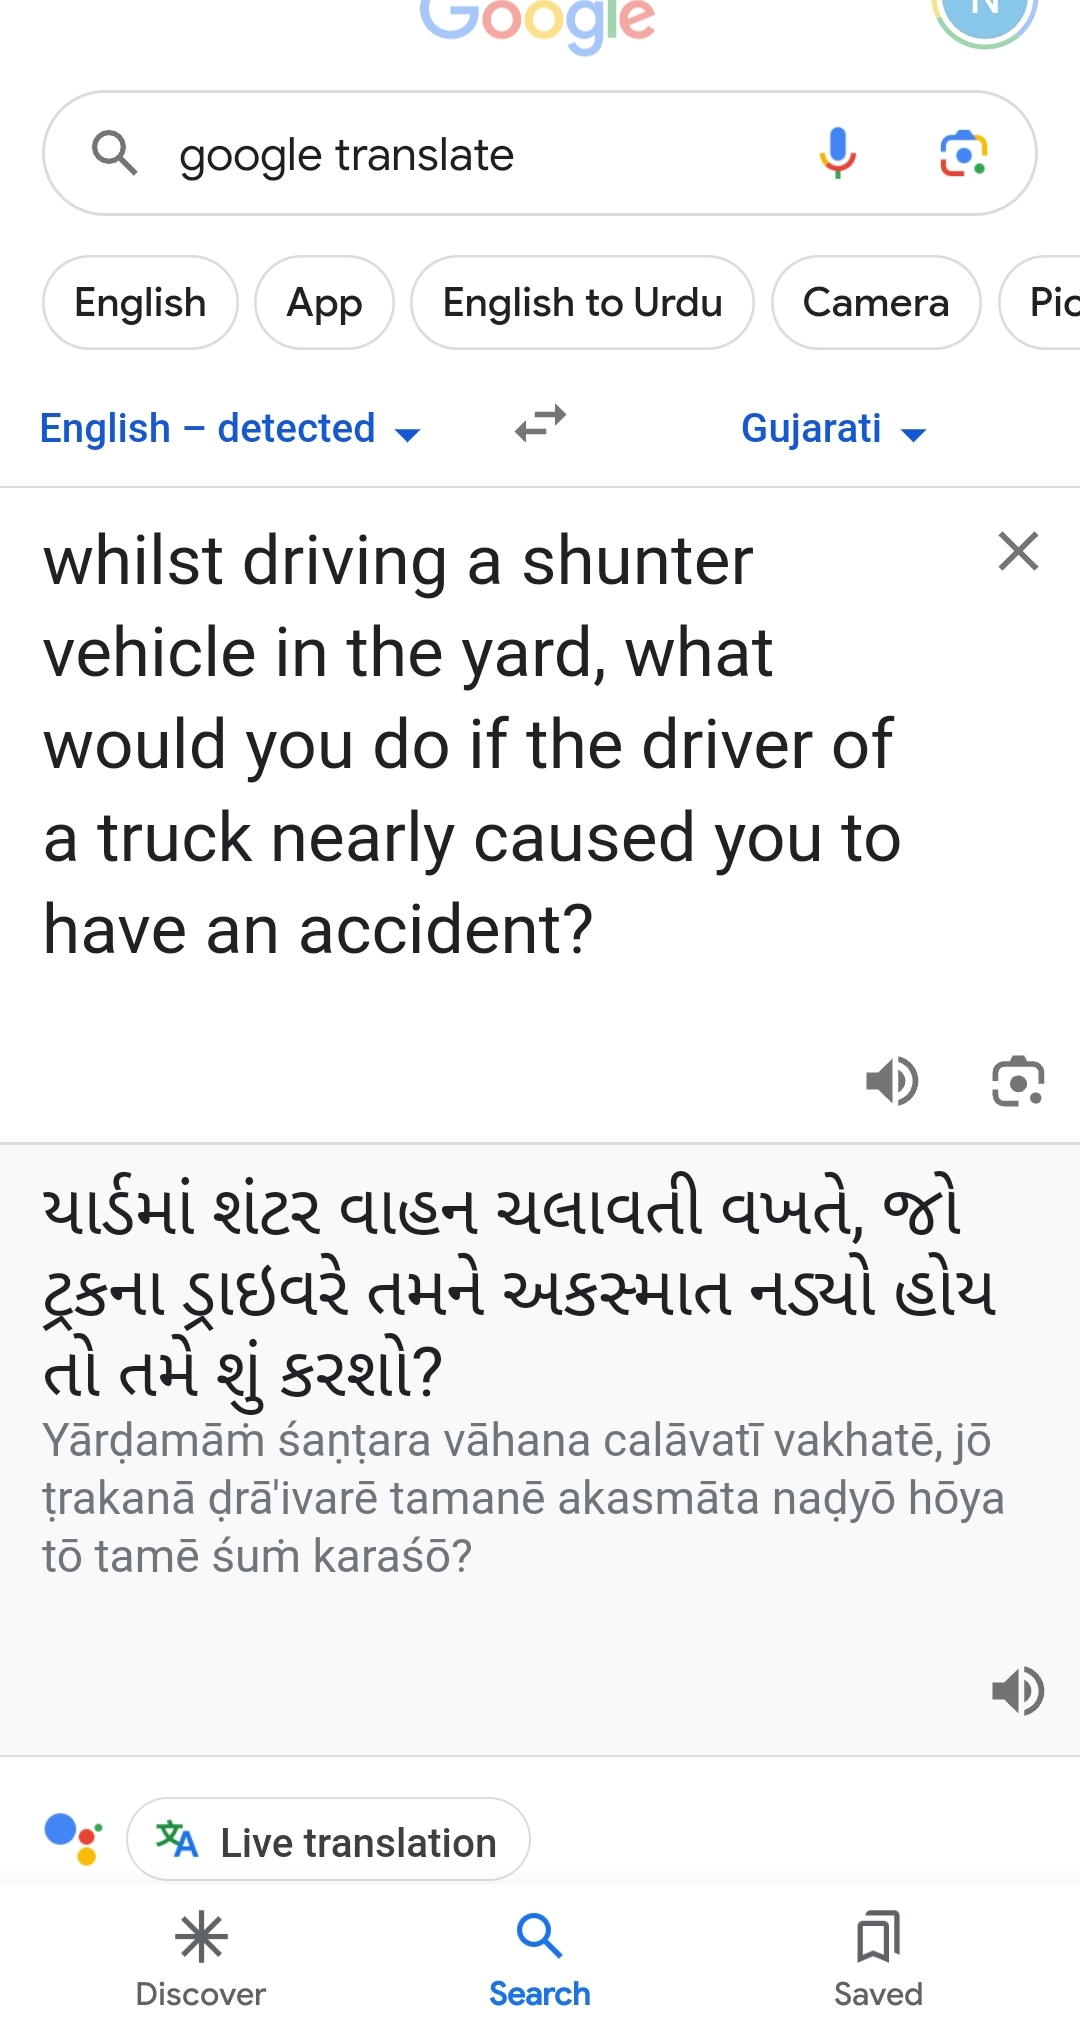 Whilst driving a shunter vehicle in the yard, what would you do if the driver of a truck nearly caused you to have an accident?